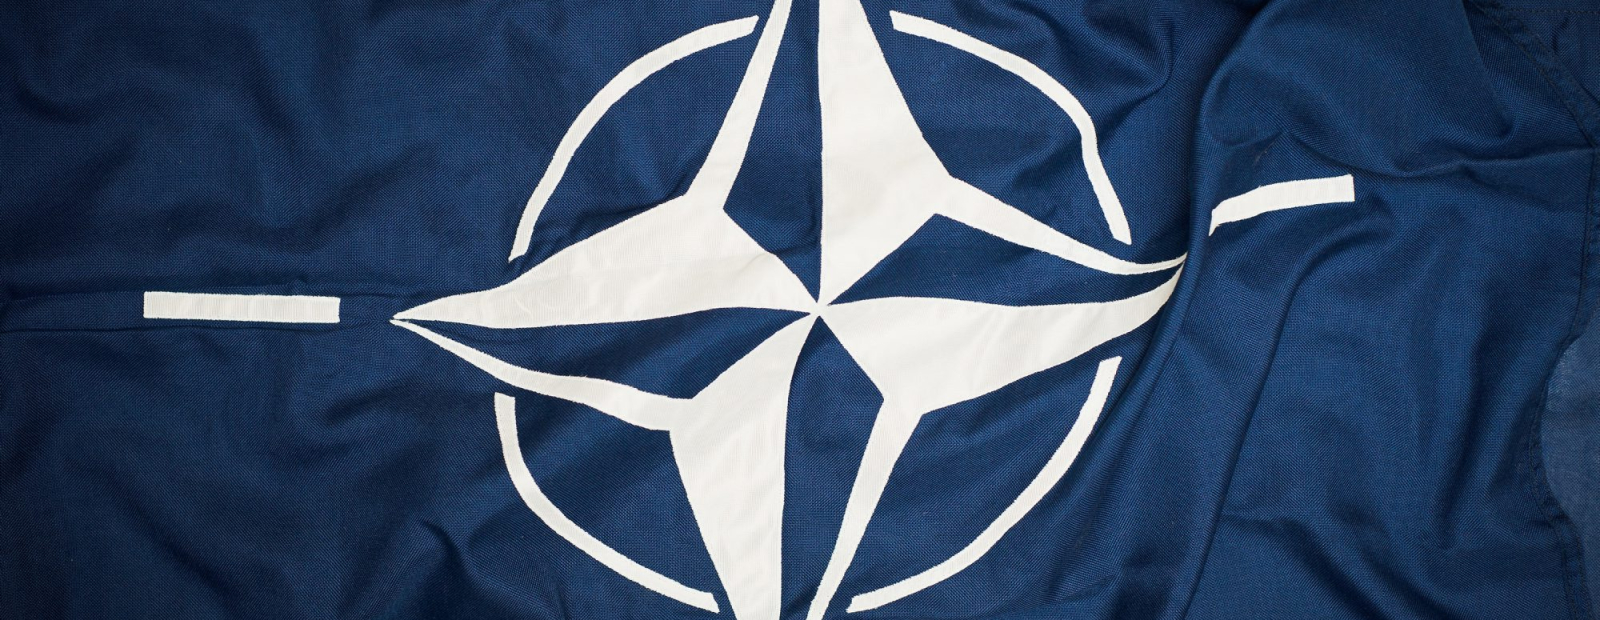 Ukraine-NATO Council Meeting: Commitment to Support Ukraine and Strengthen Defense Capabilities